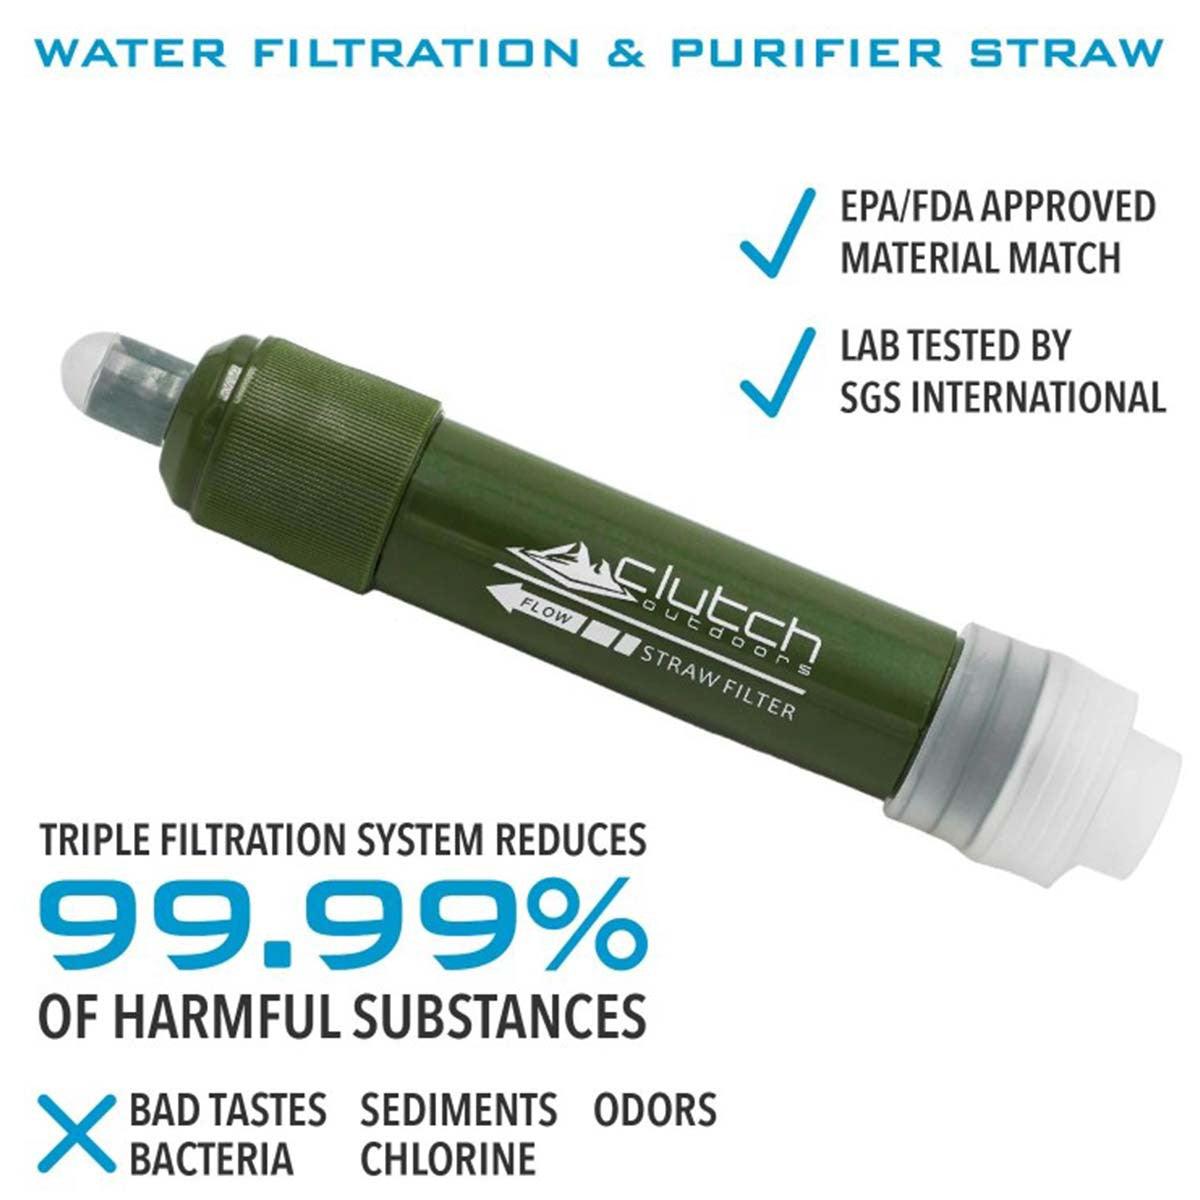 Clutch Outdoors Water Filtration & Purifier Straw - Leapfrog Outdoor Sports and Apparel